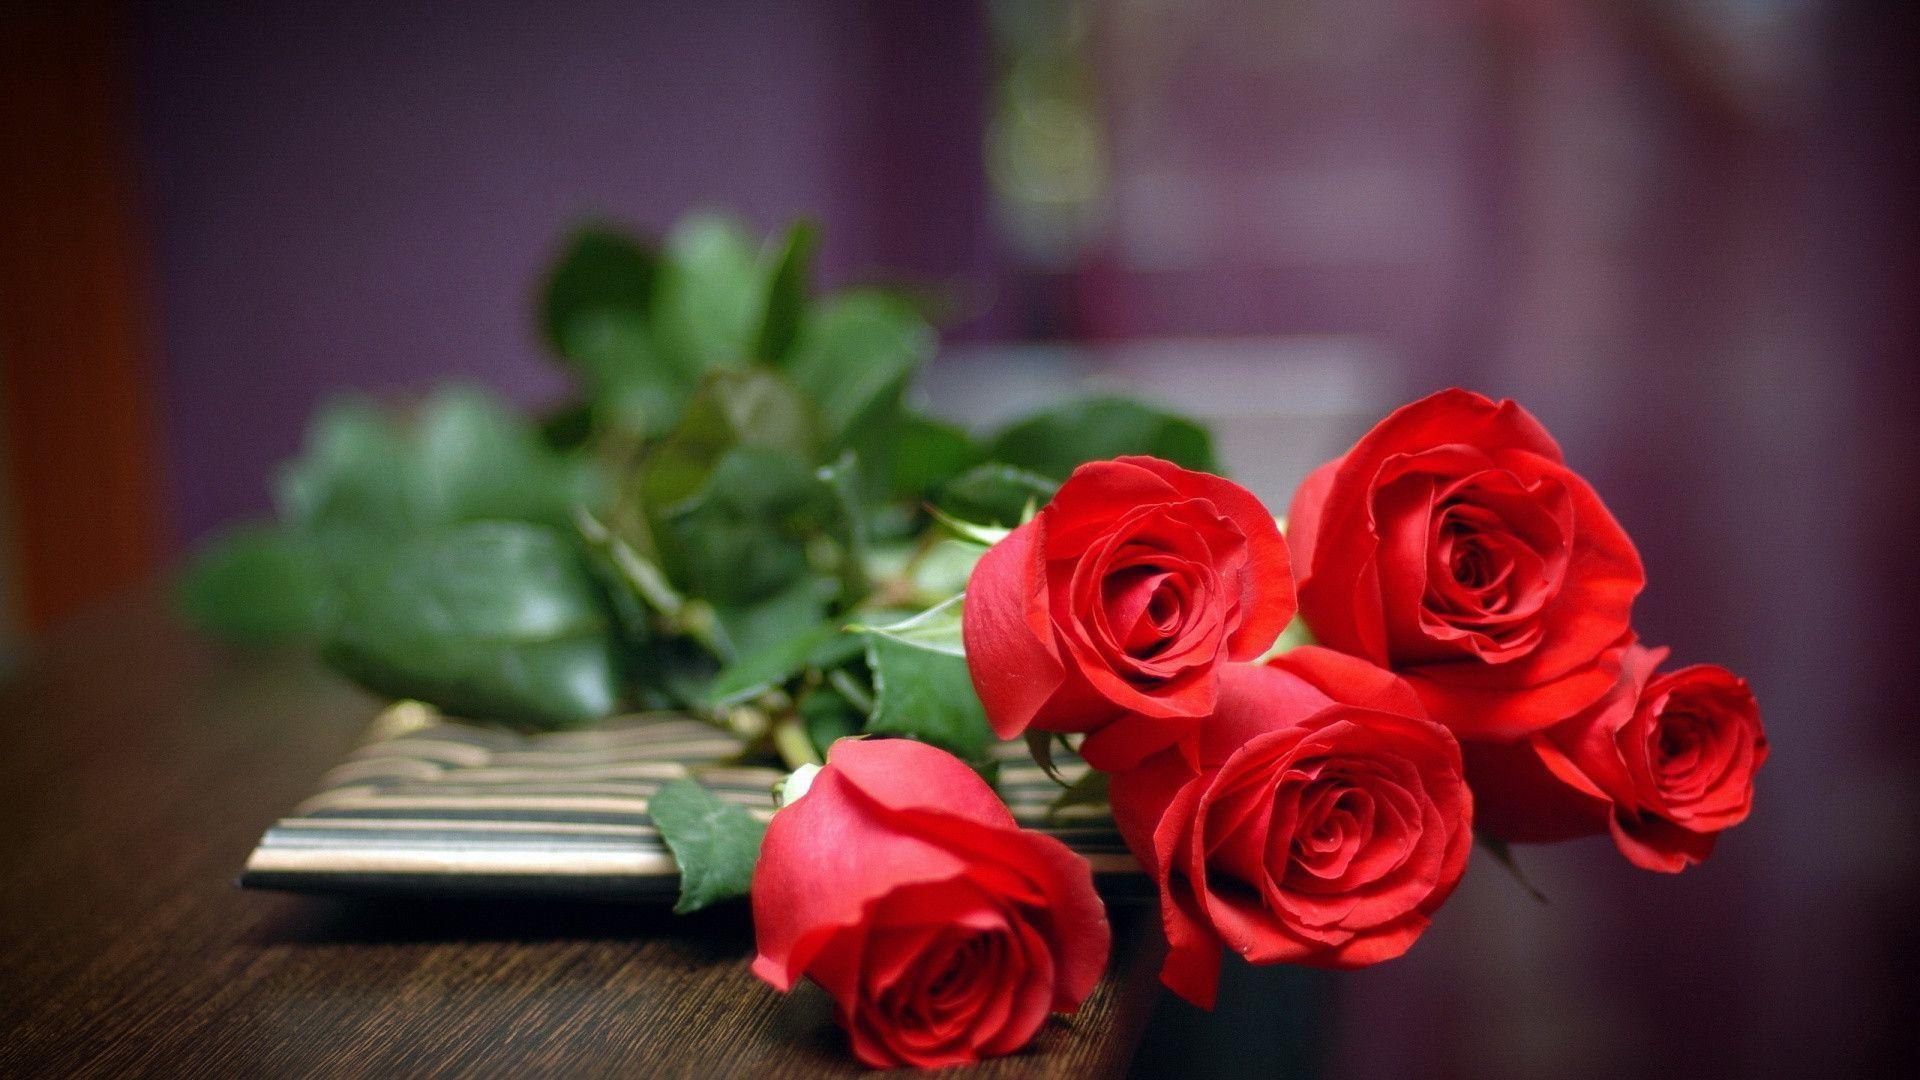 Wallpaper For > Red Rose Wallpaper With Love Quotes